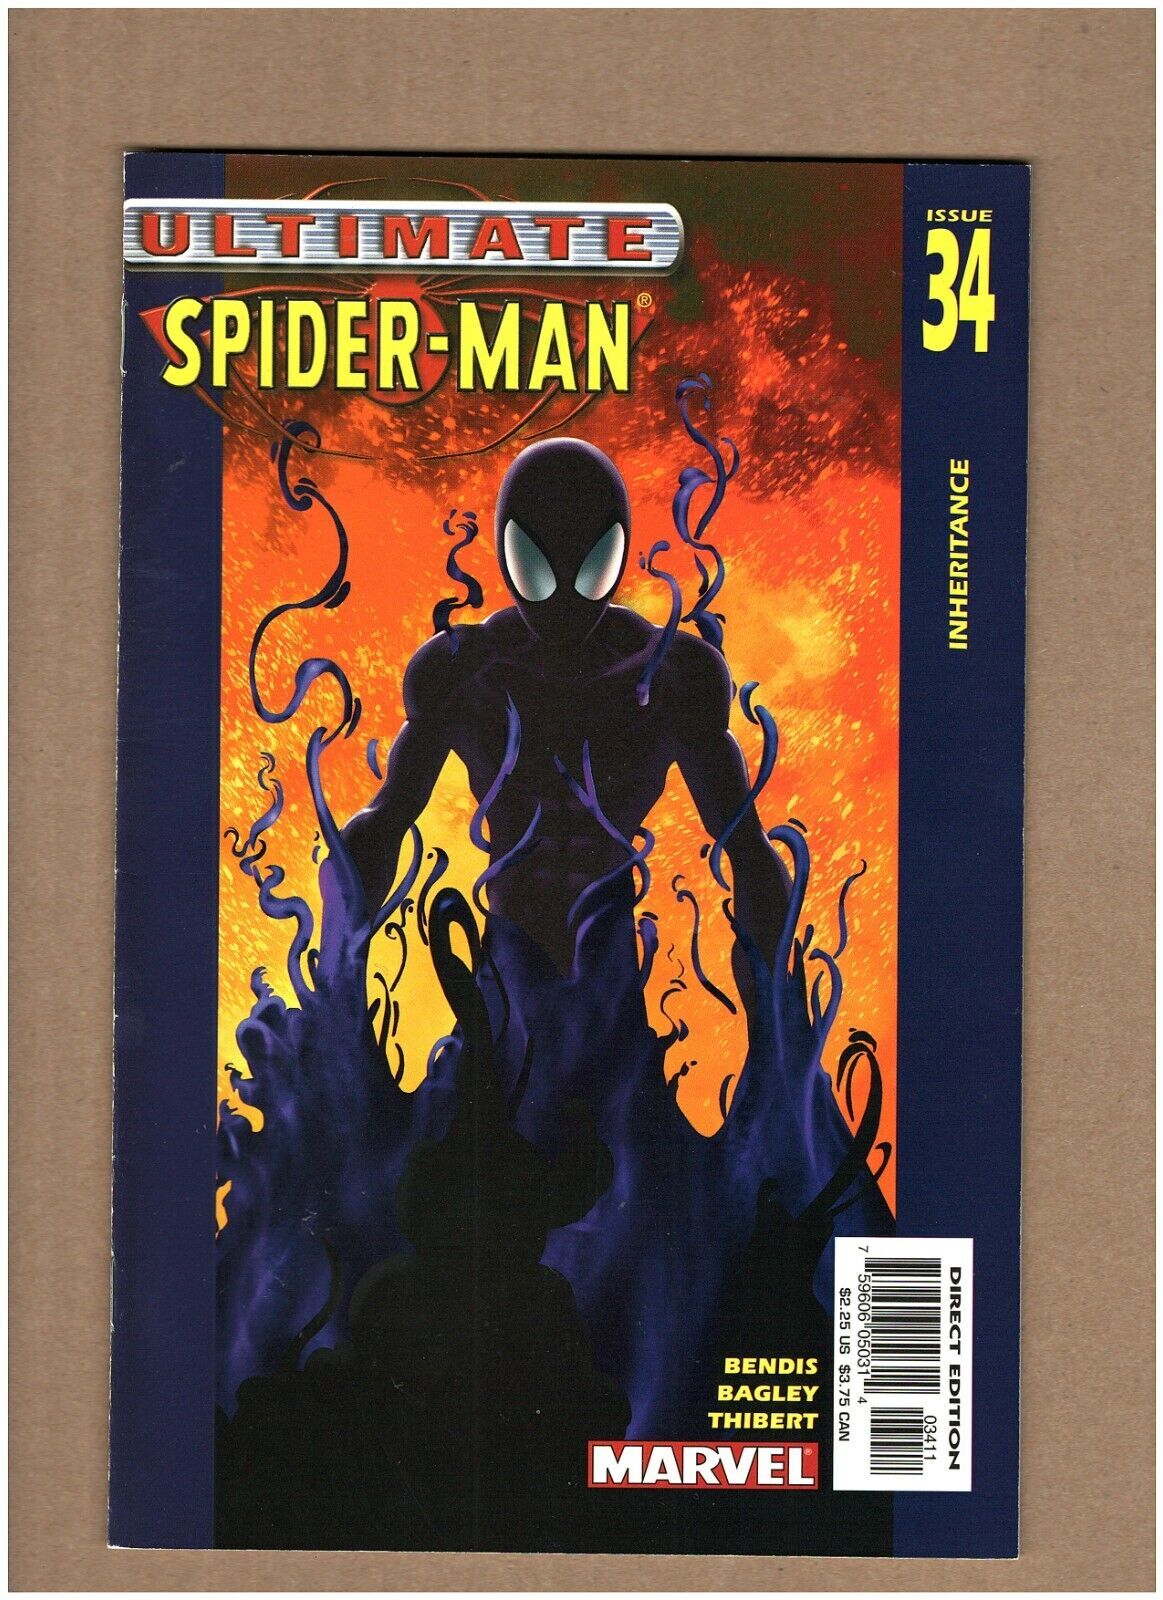 Marvel Ultimate Spider-Man - Issue 39 - Therapy; Bendis, Bagley, Thibert -  Comic